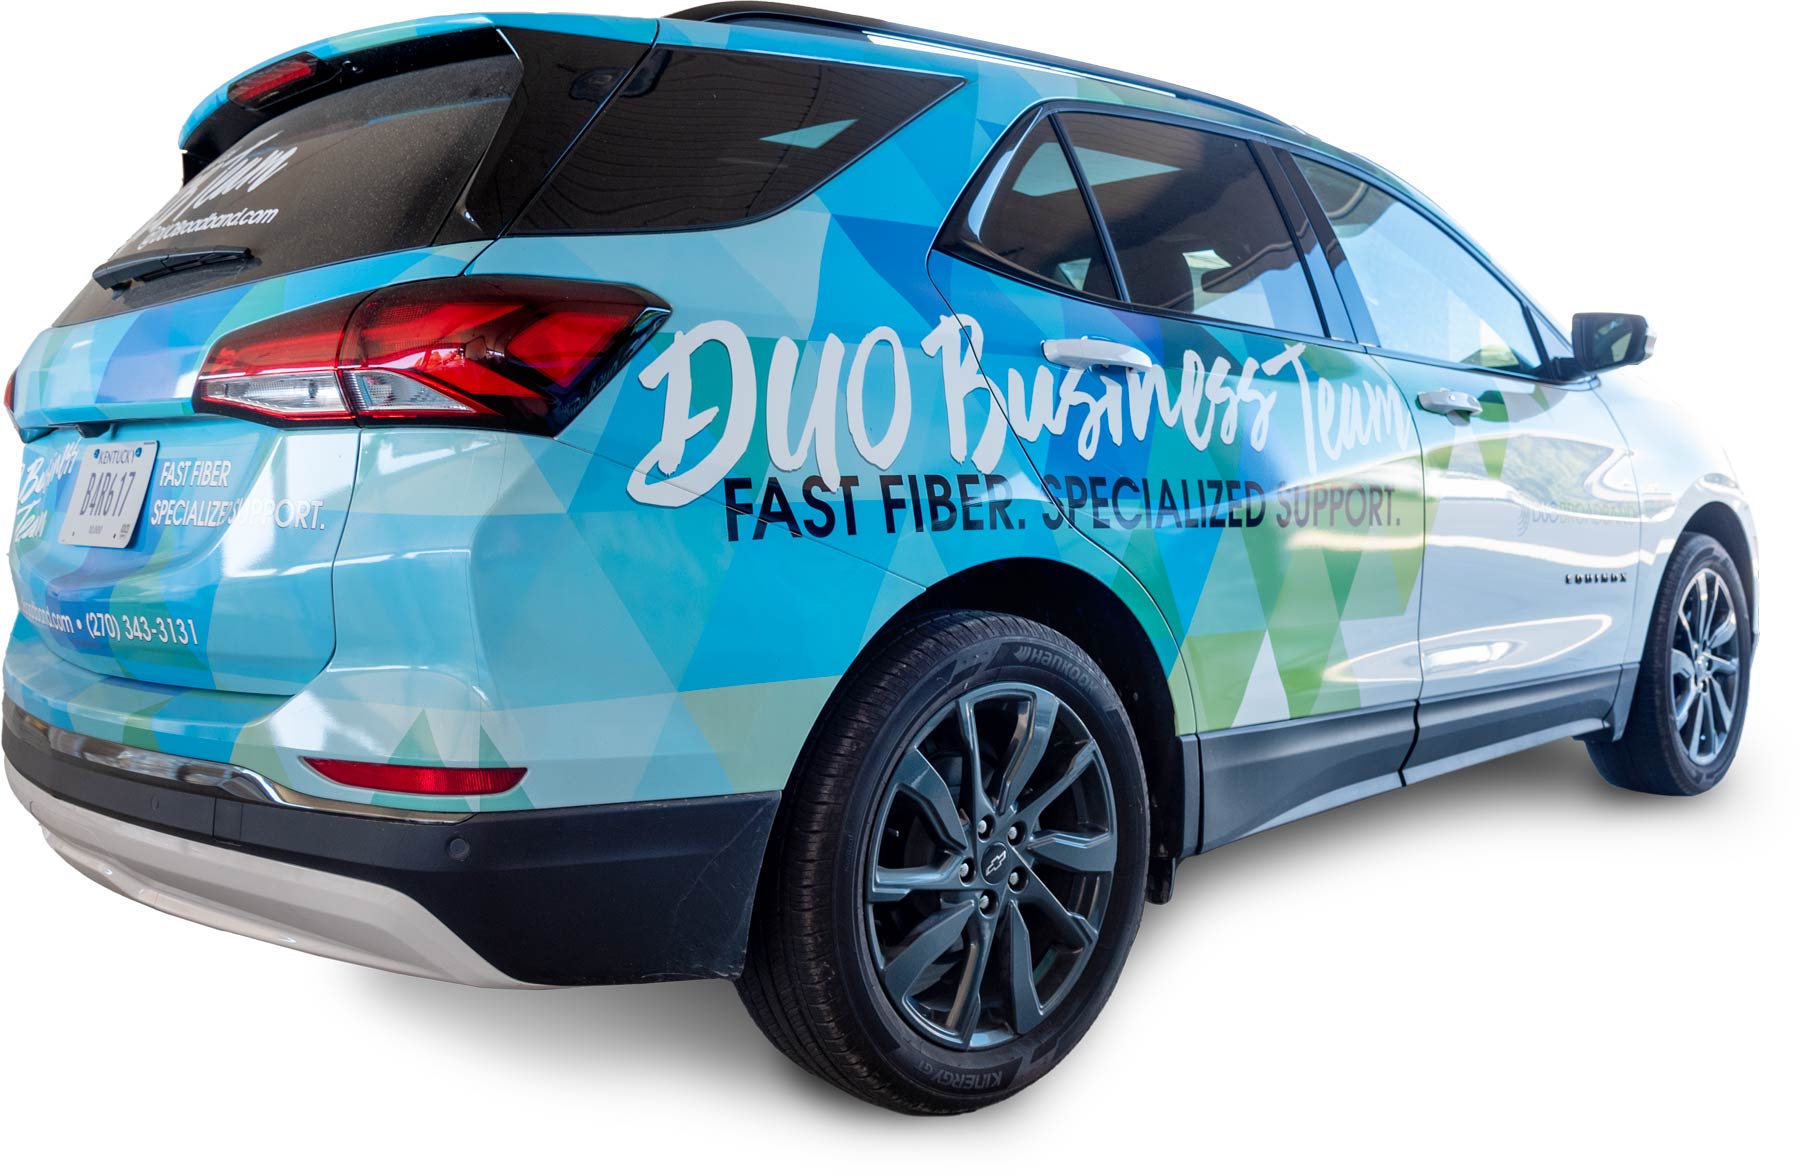 DUO Broadband business team vehicle with graphics wrap.